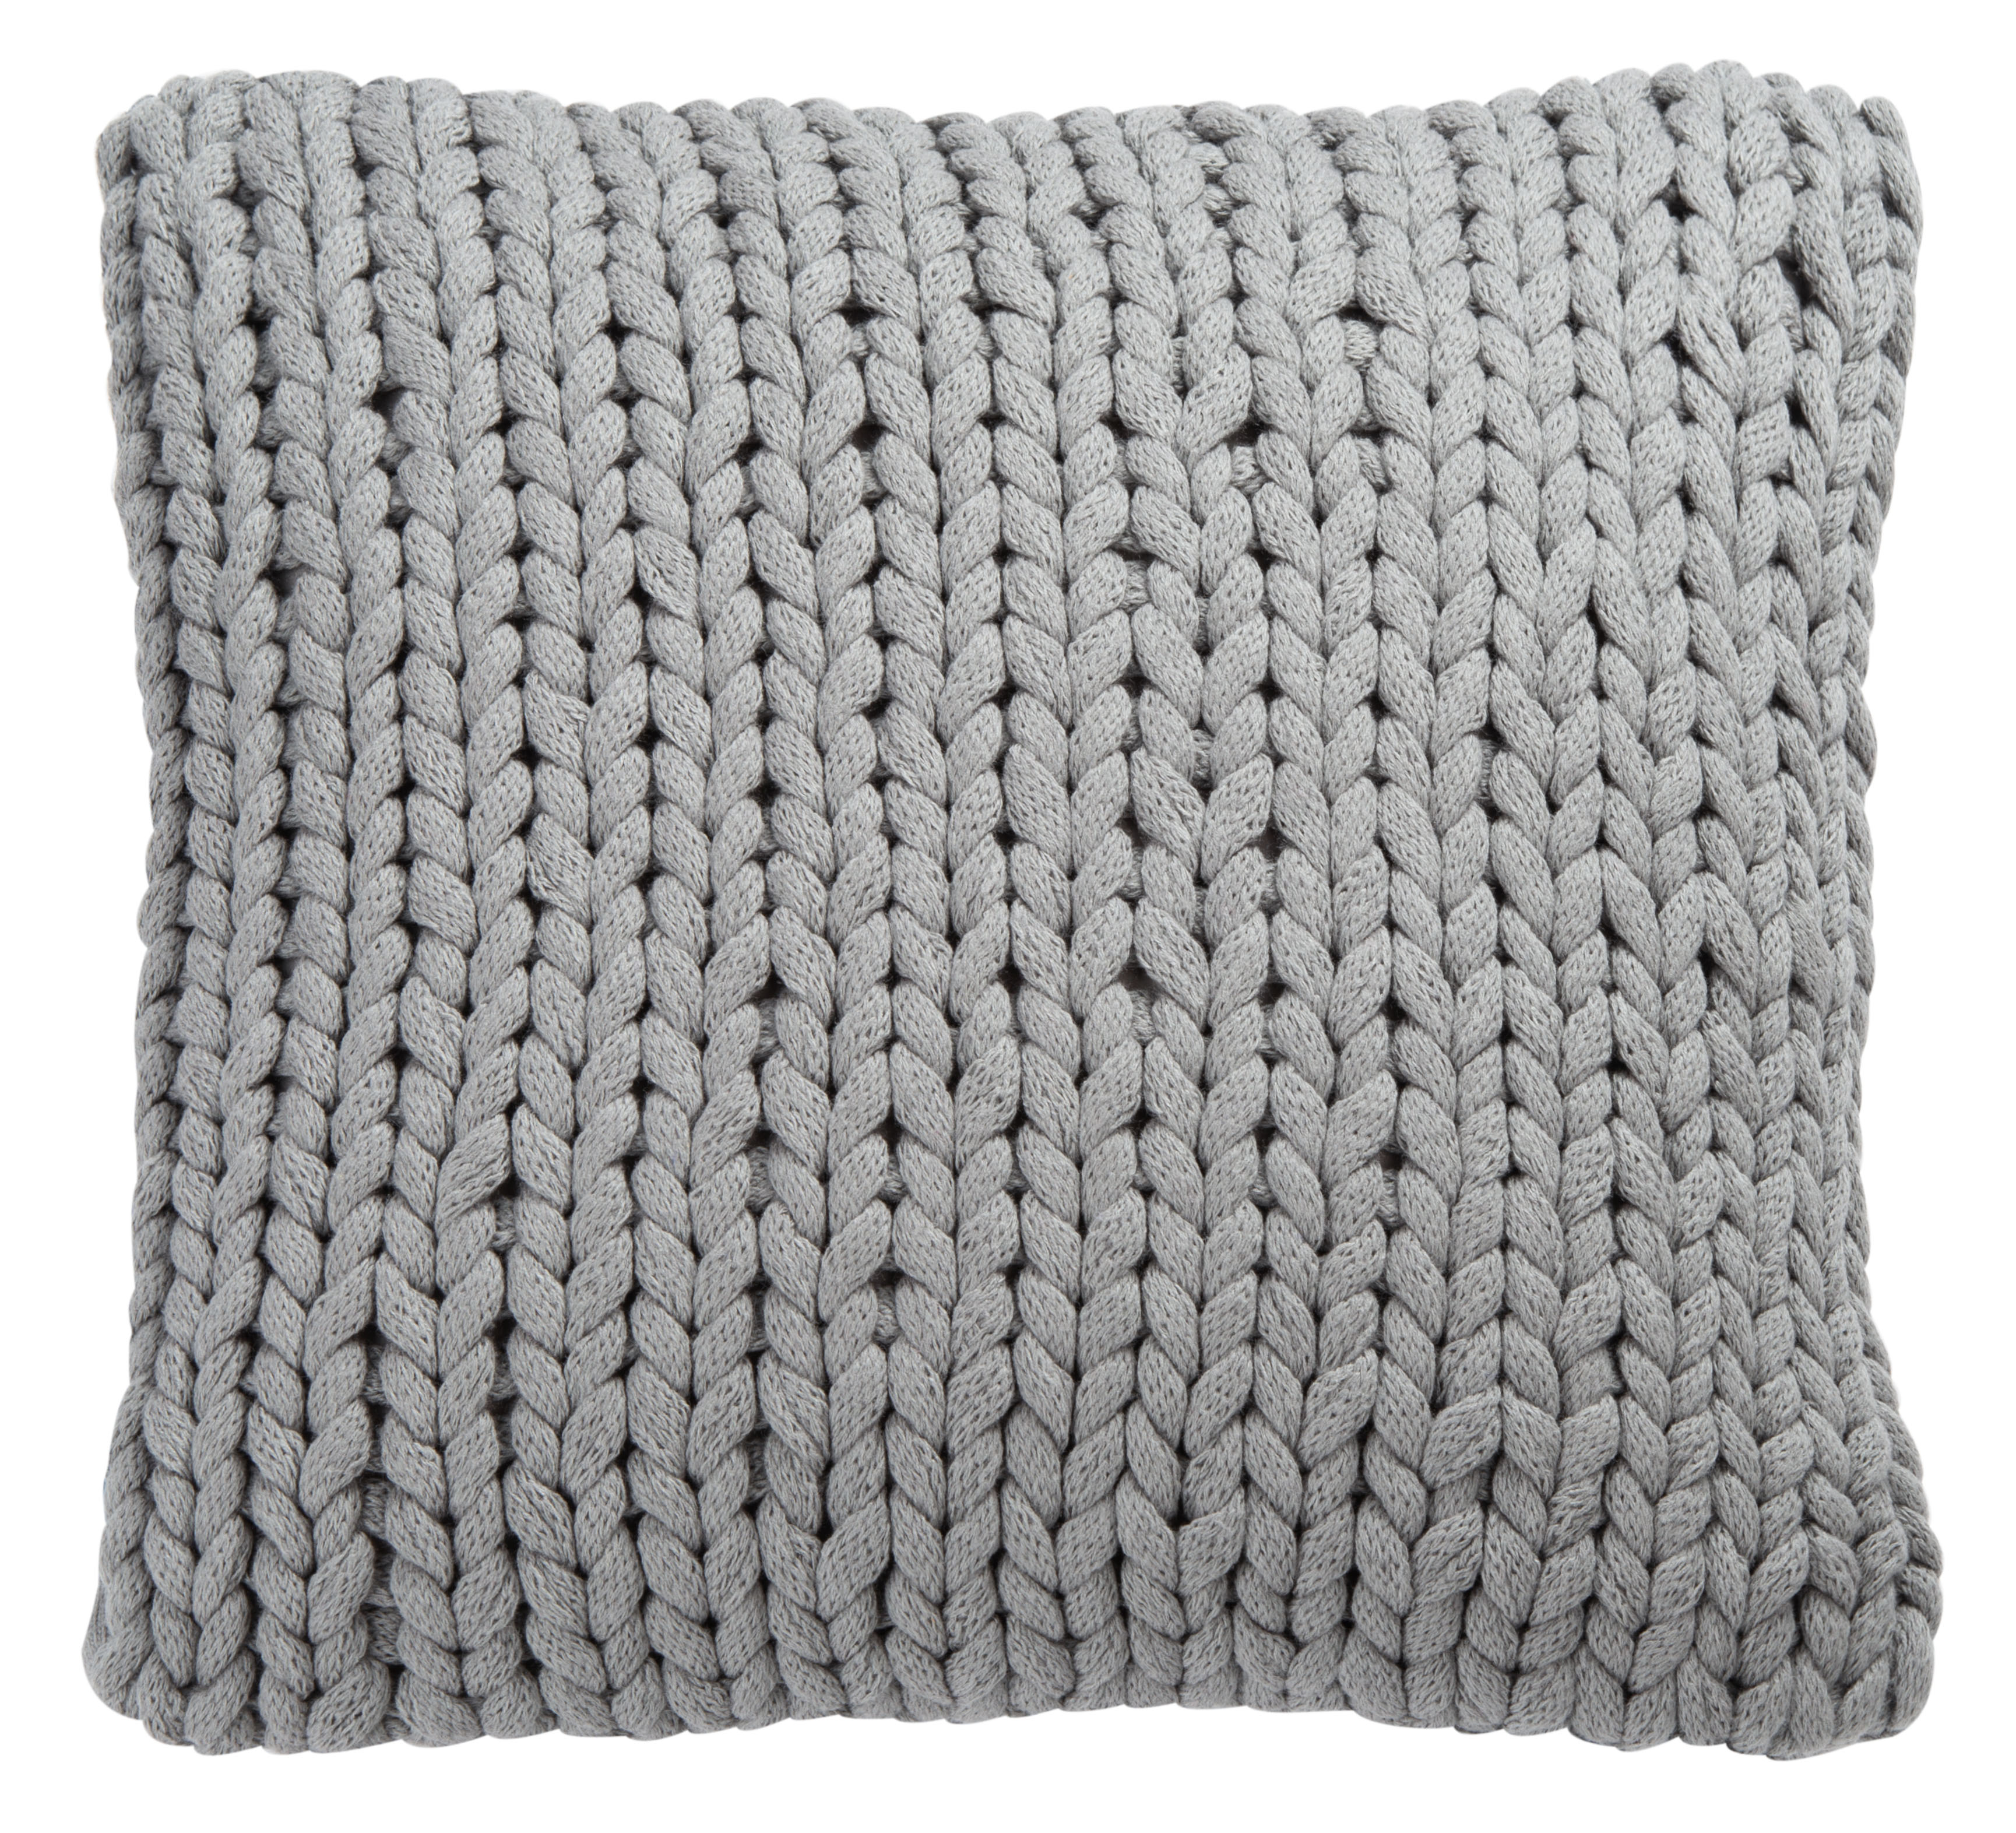 SAFAVIEH Adalina Solid Knitted Accent Pillow, 20" x 20", Grey - image 1 of 3